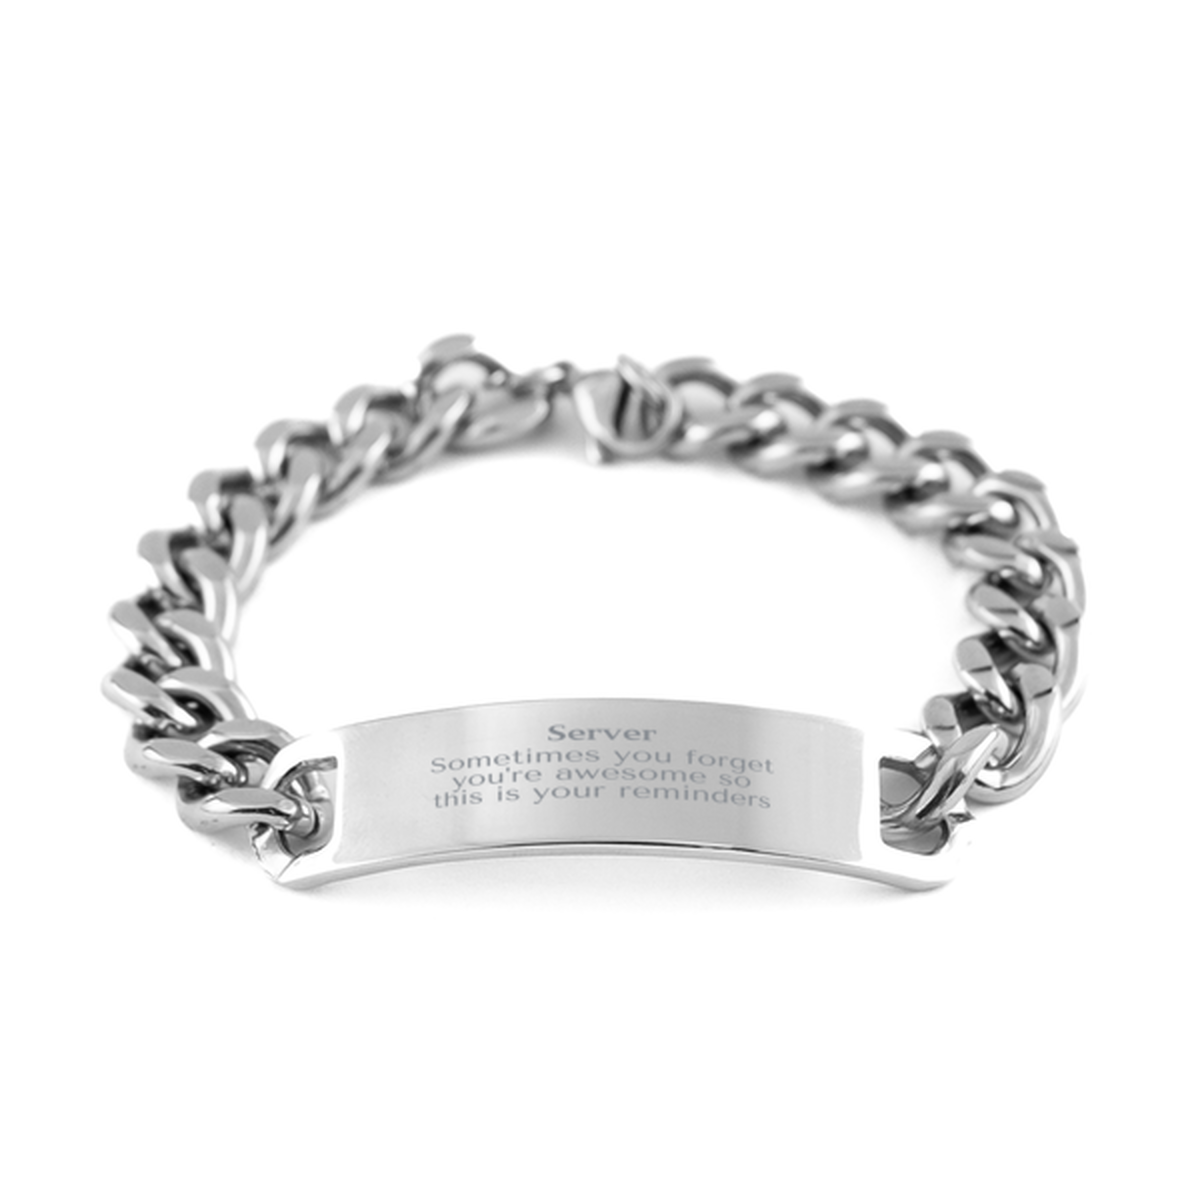 Sentimental Server Cuban Chain Stainless Steel Bracelet, Server Sometimes you forget you're awesome so this is your reminders, Graduation Christmas Birthday Gifts for Server, Men, Women, Coworkers